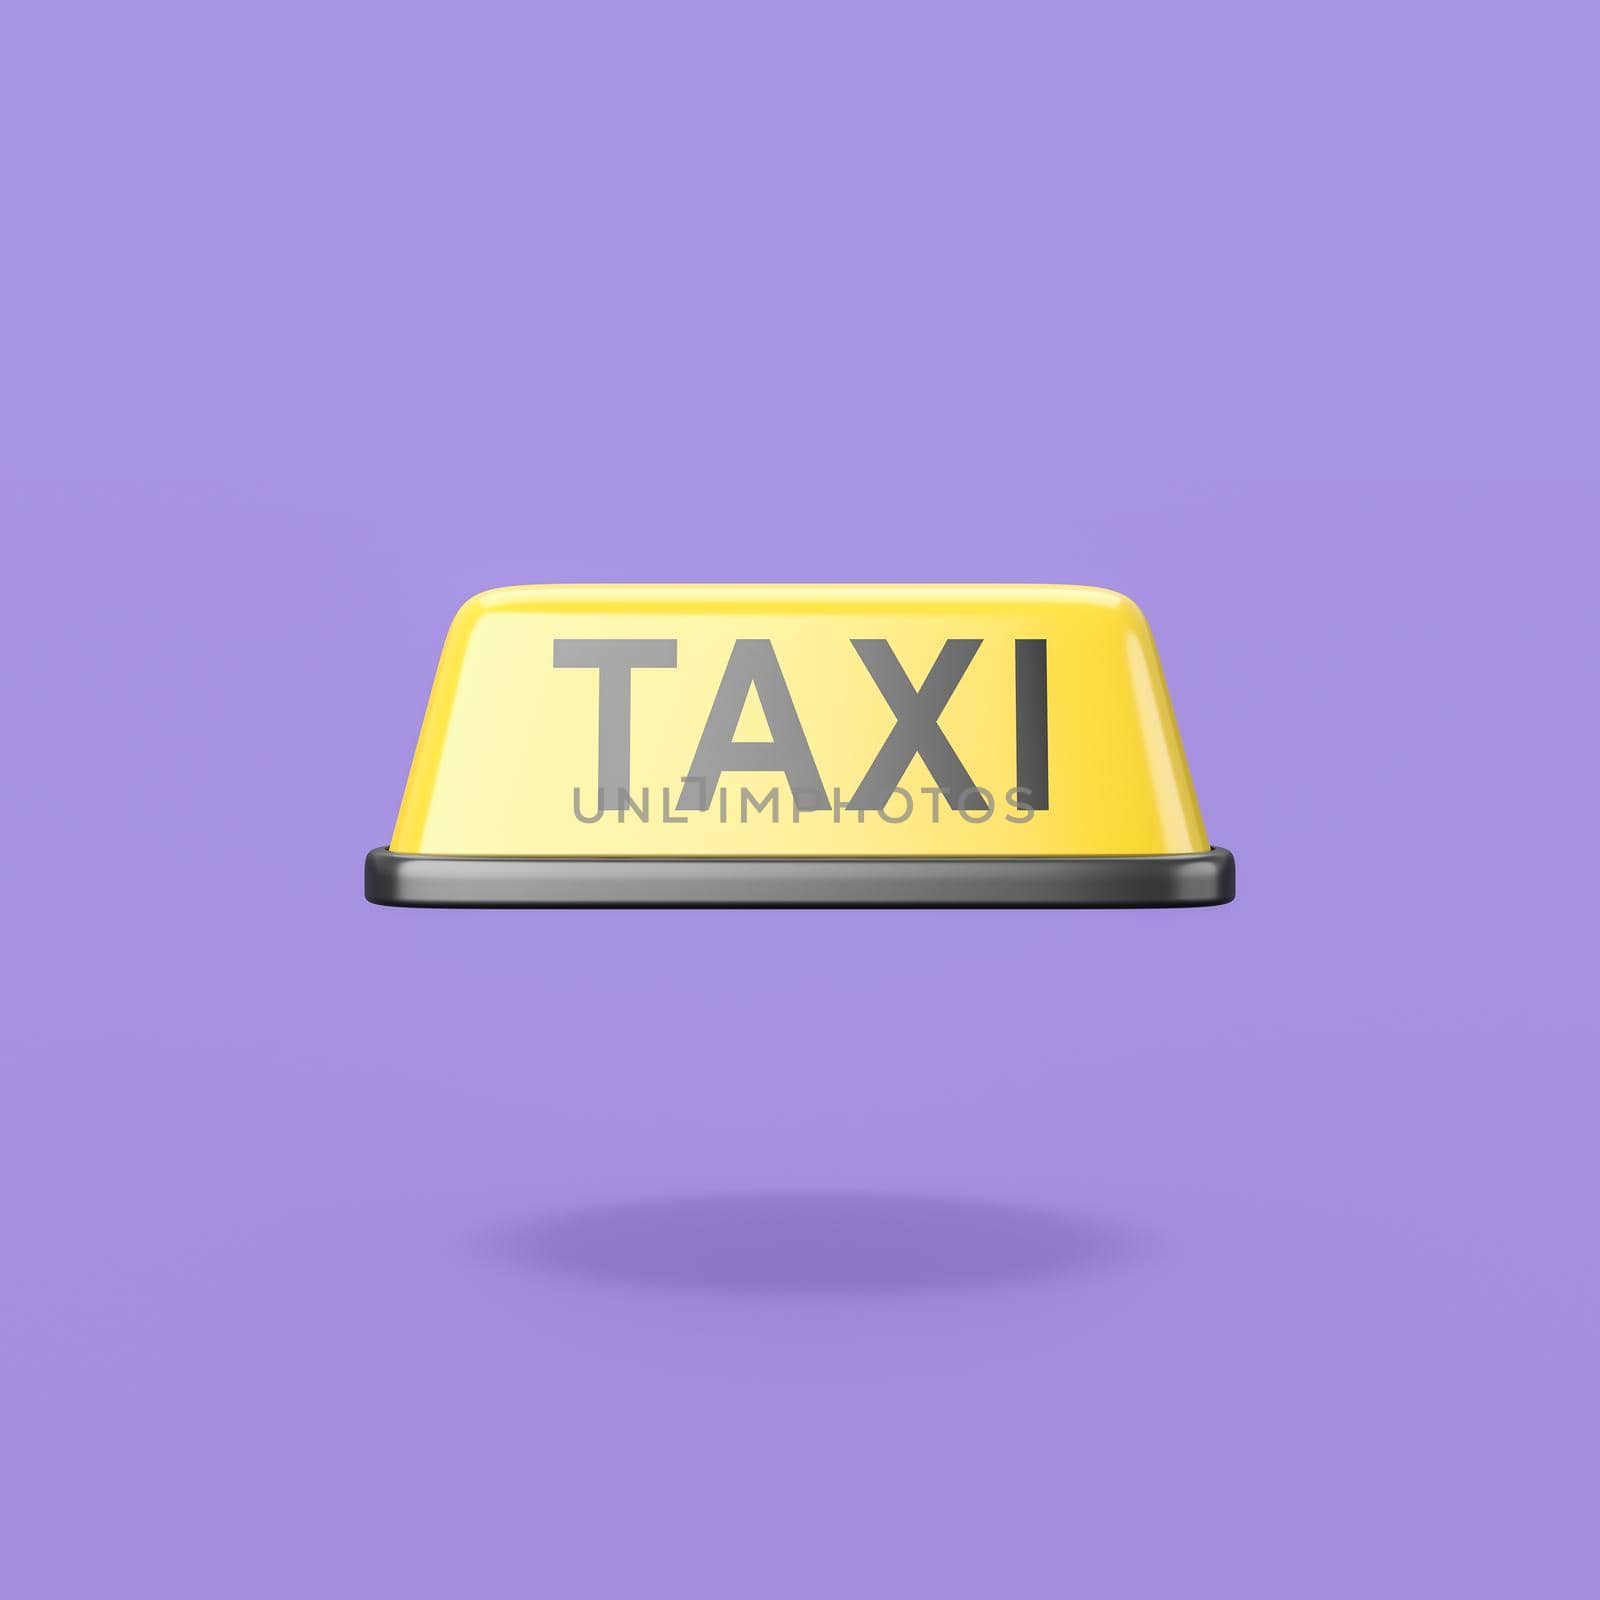 Yellow Taxi Roof Signboard Isolated on Flat Purple Background with Shadow 3D Illustration